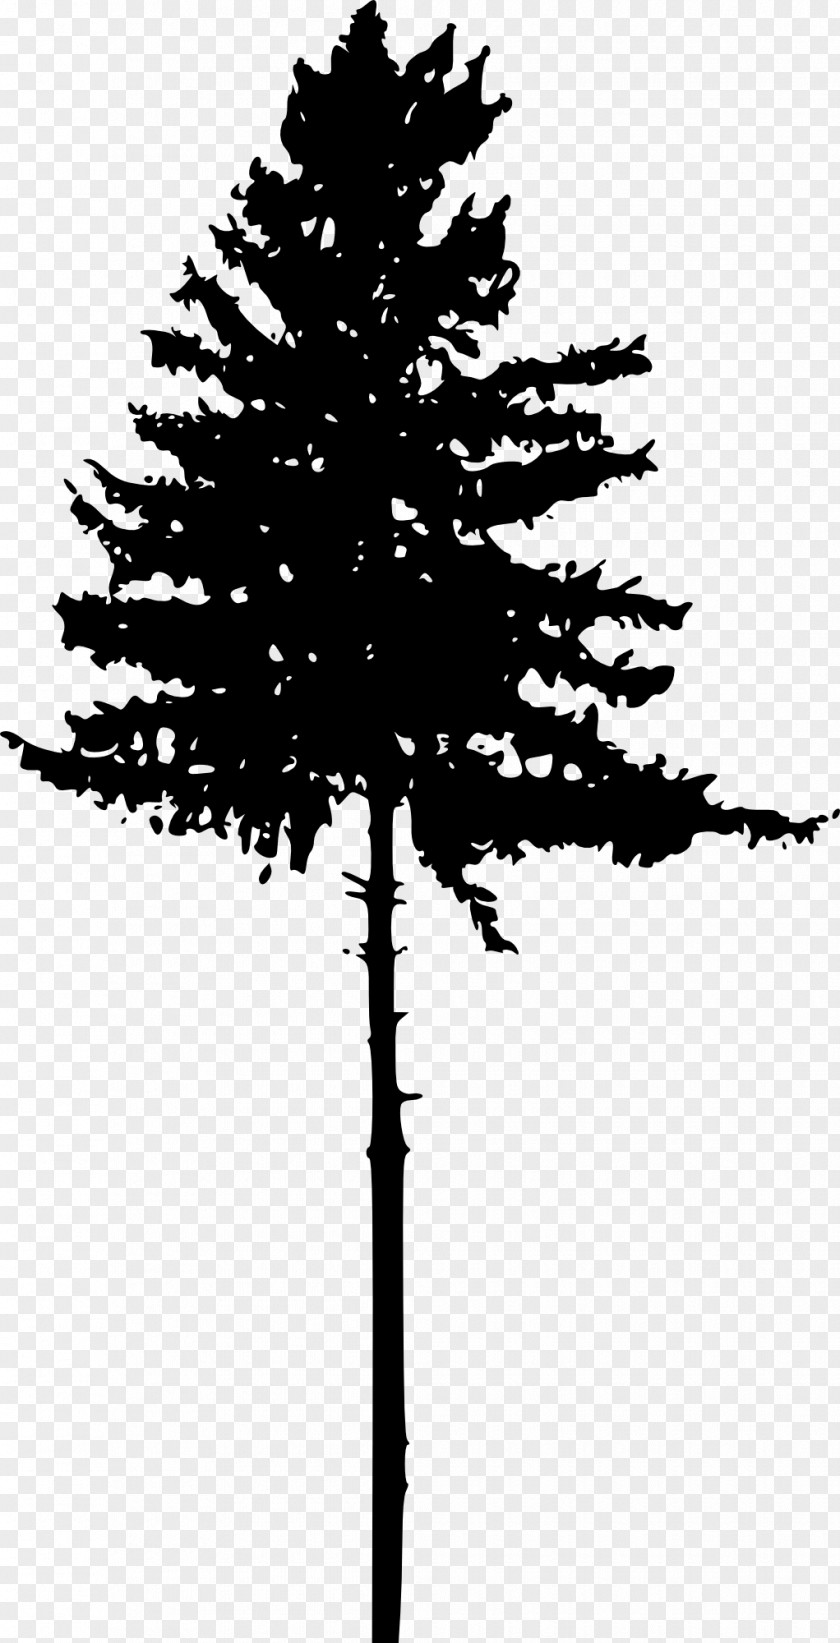 Pine Tree Silhouette Clip Art PNG